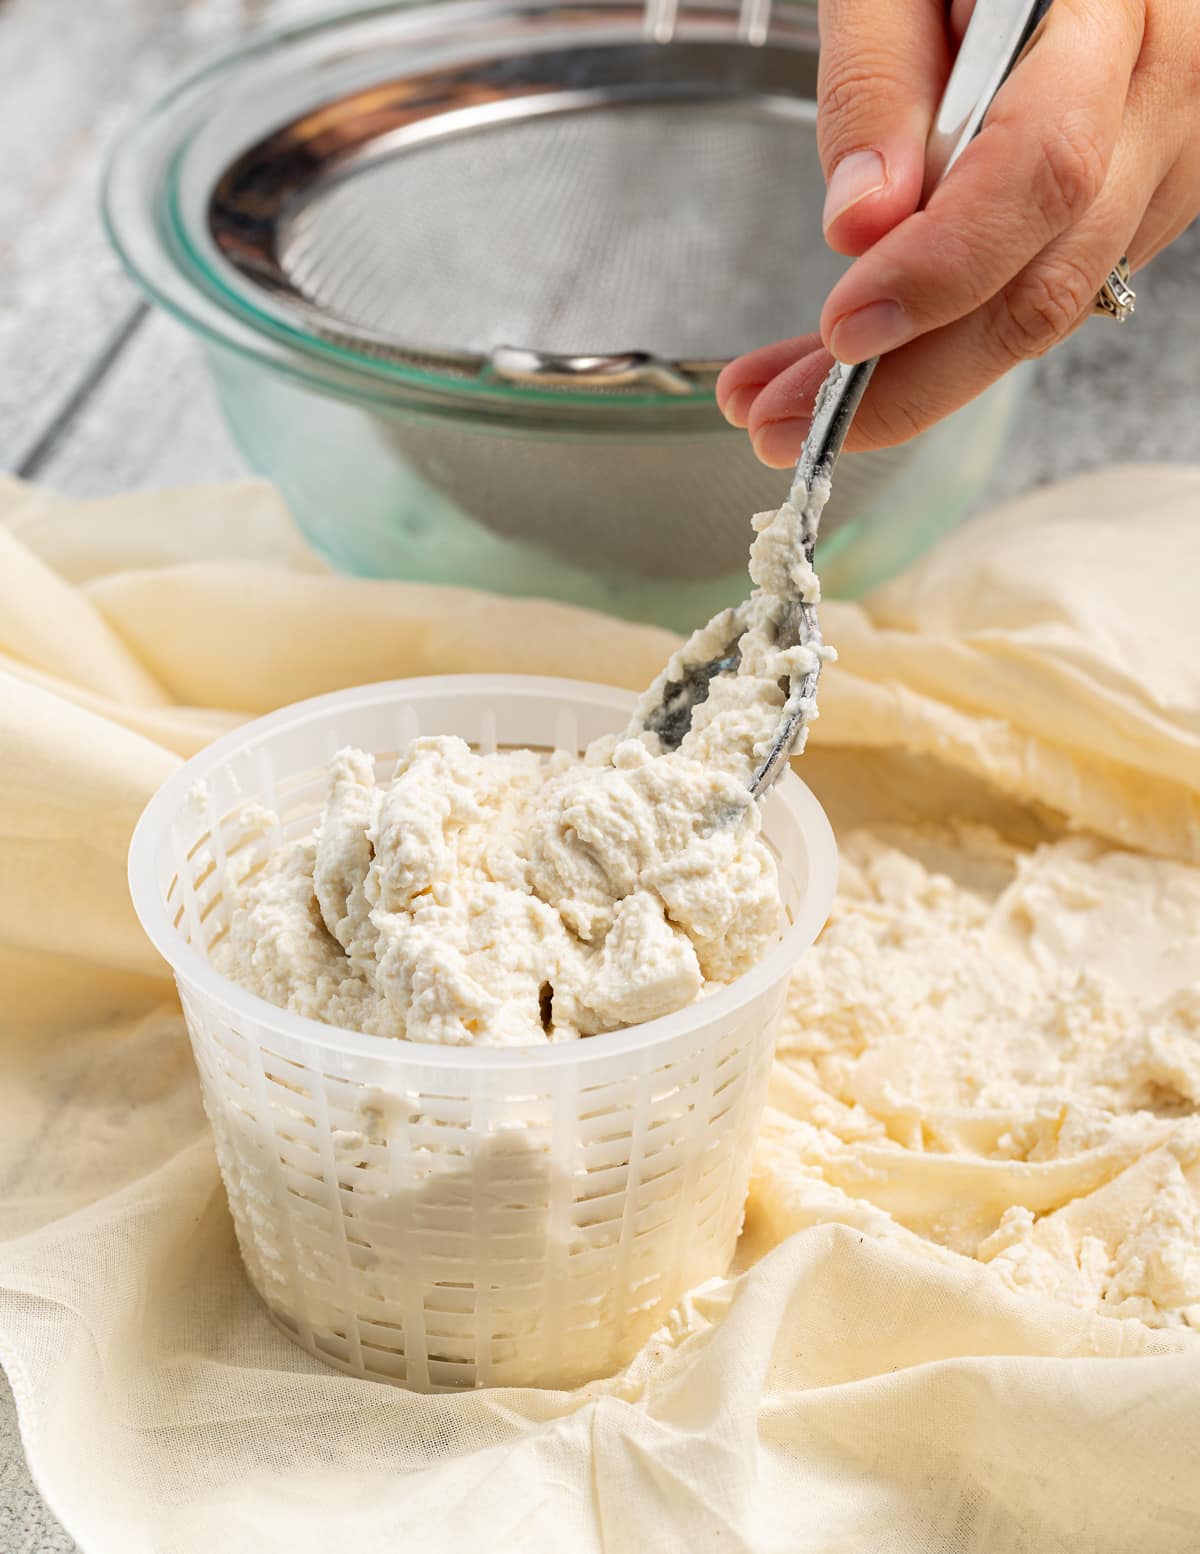 vegan ricotta being packed into a cheese mold